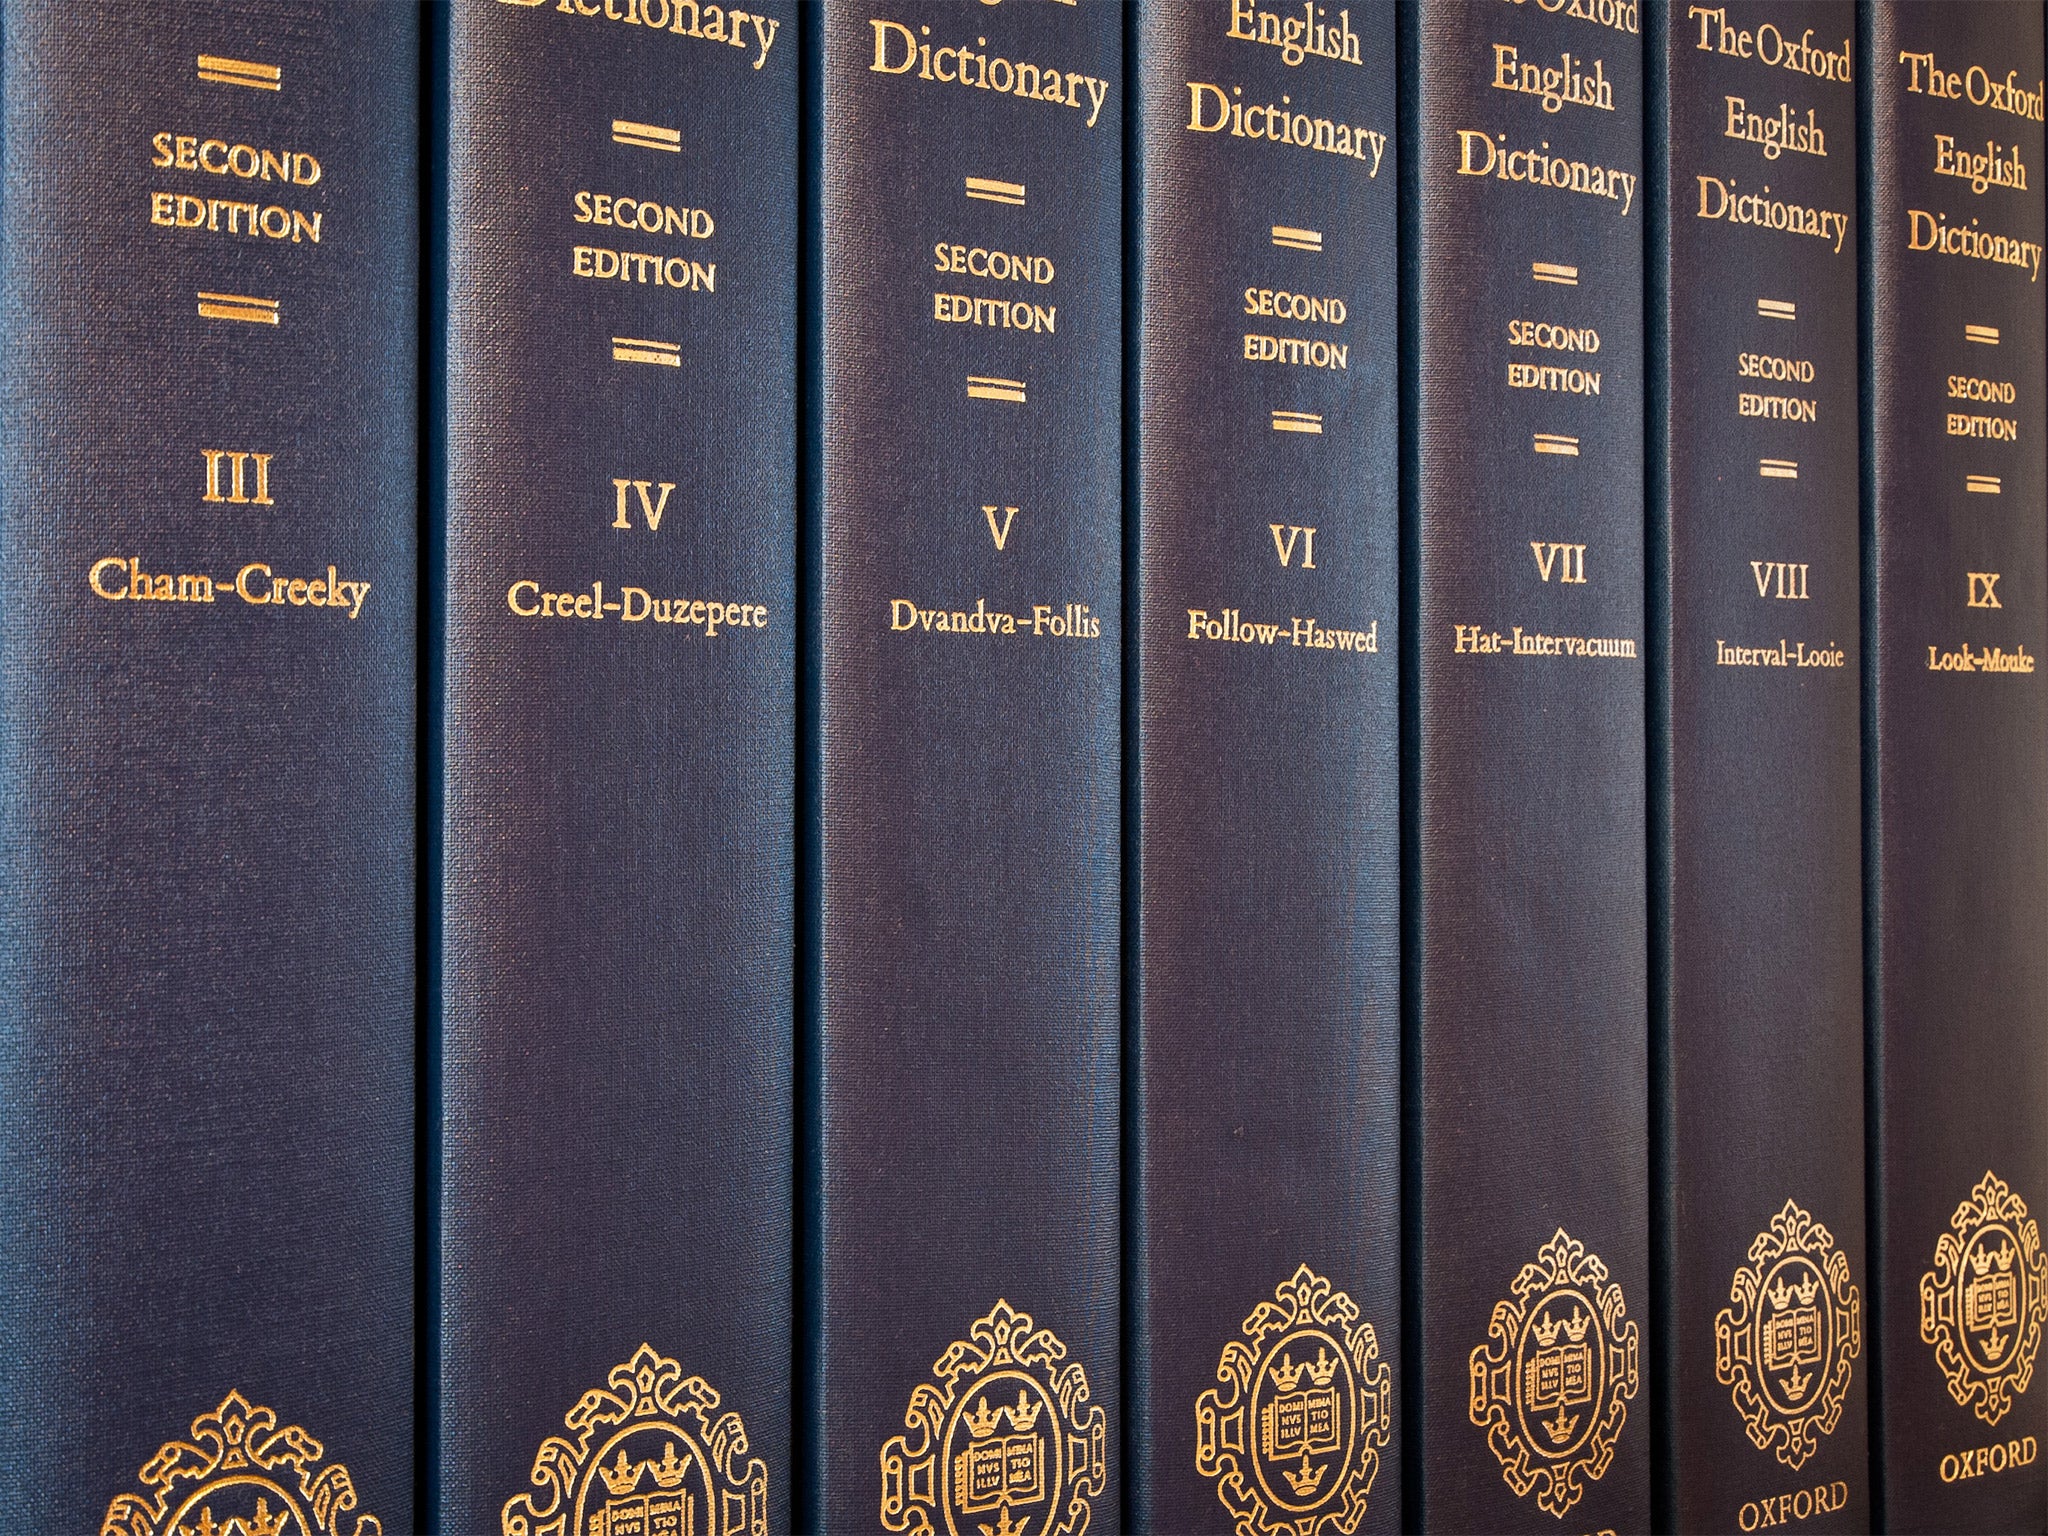 The OED is widely regarded as the most complete record of the English language ever assembled